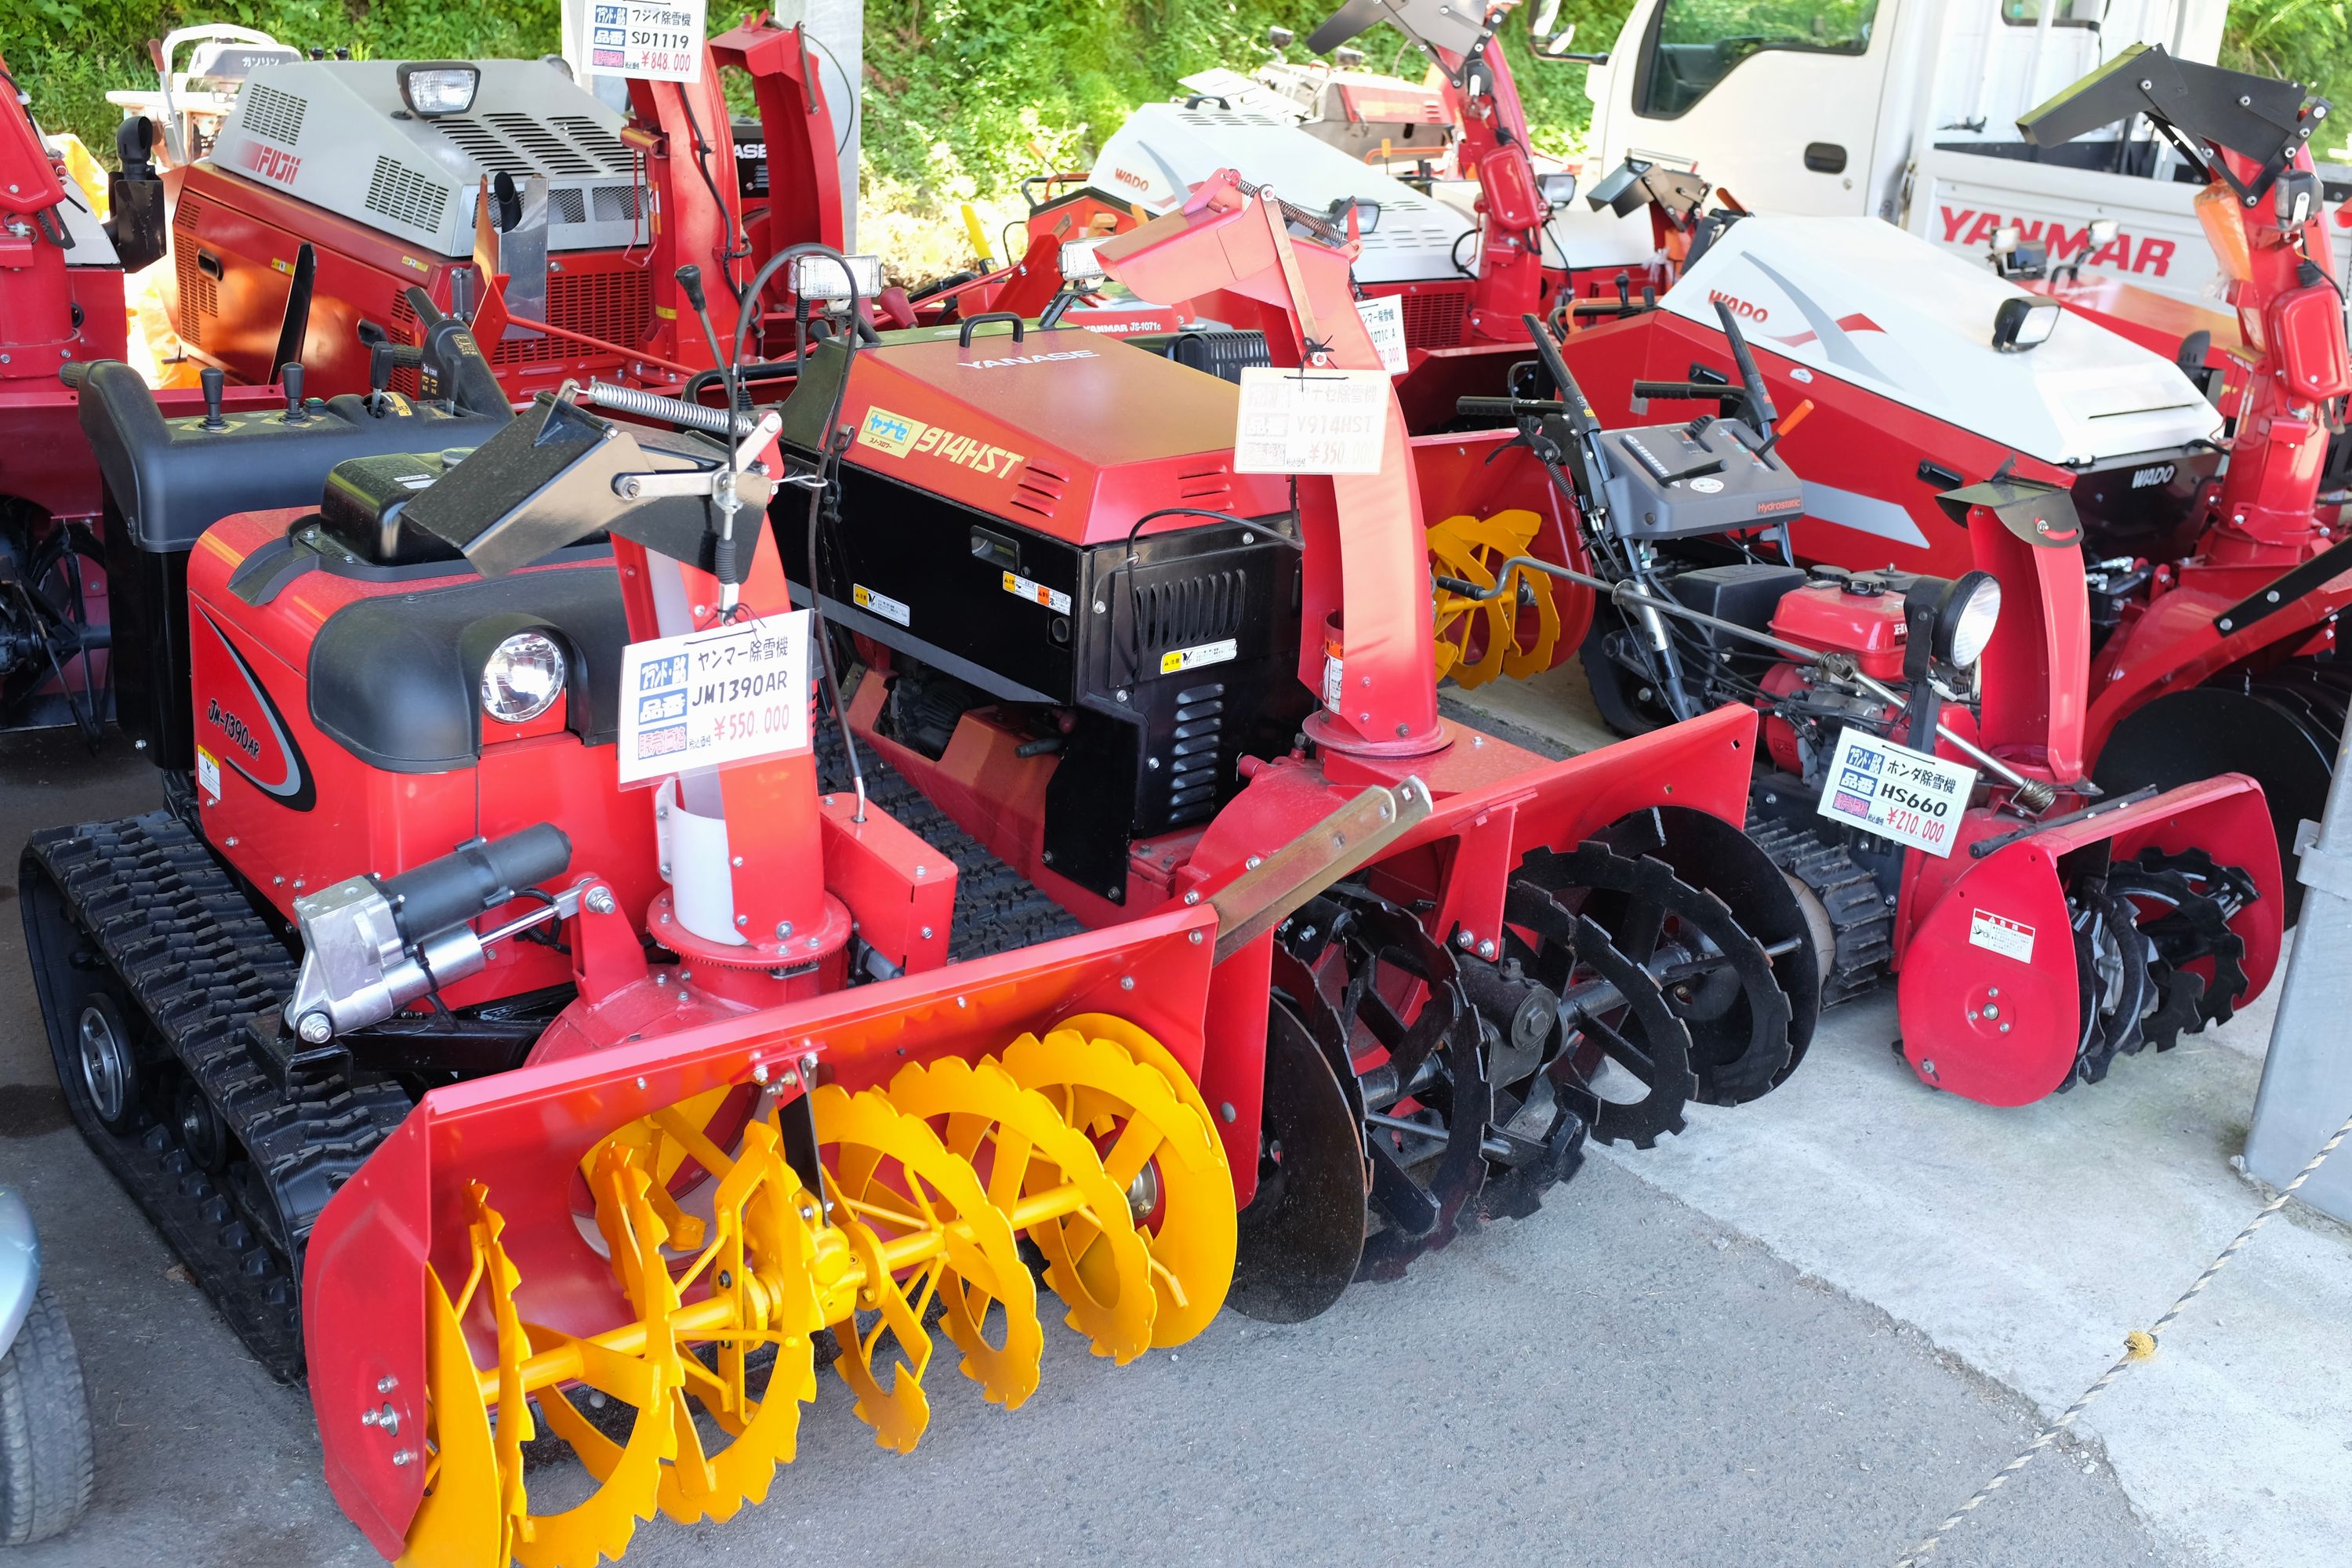 Large red and yellow snowplows for sale.